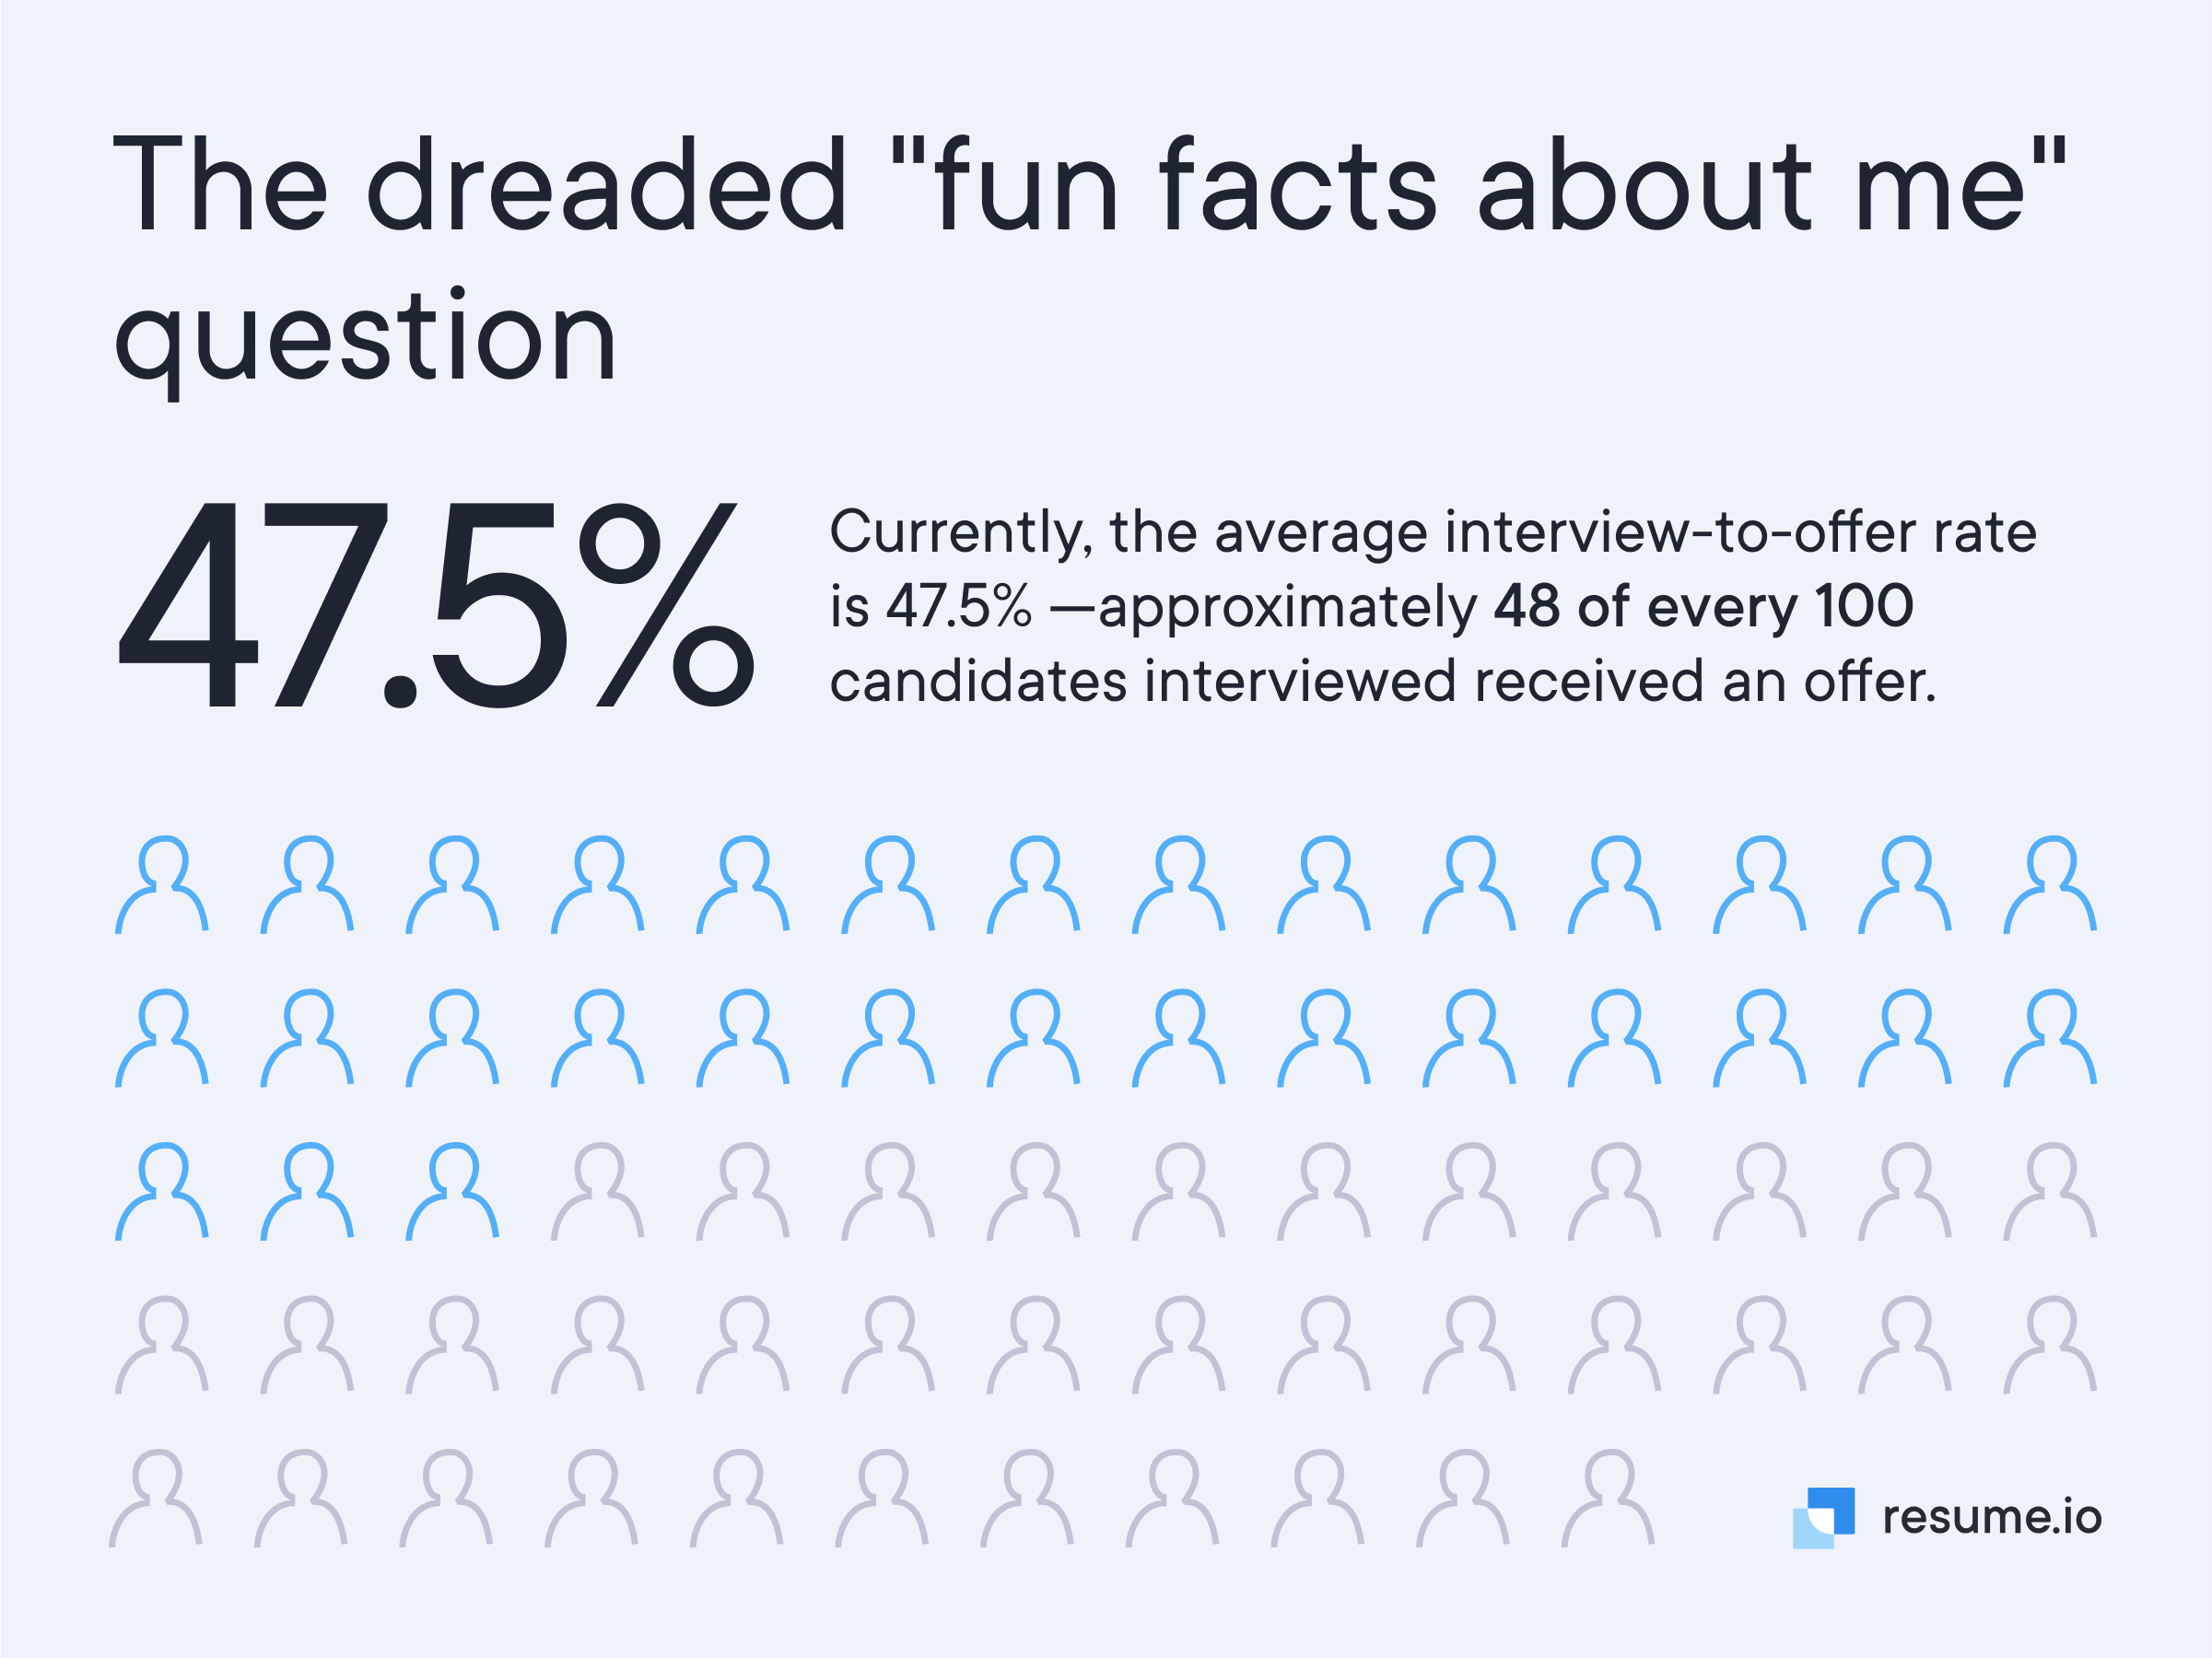 48 of every 100 candidates interviewed received an offer